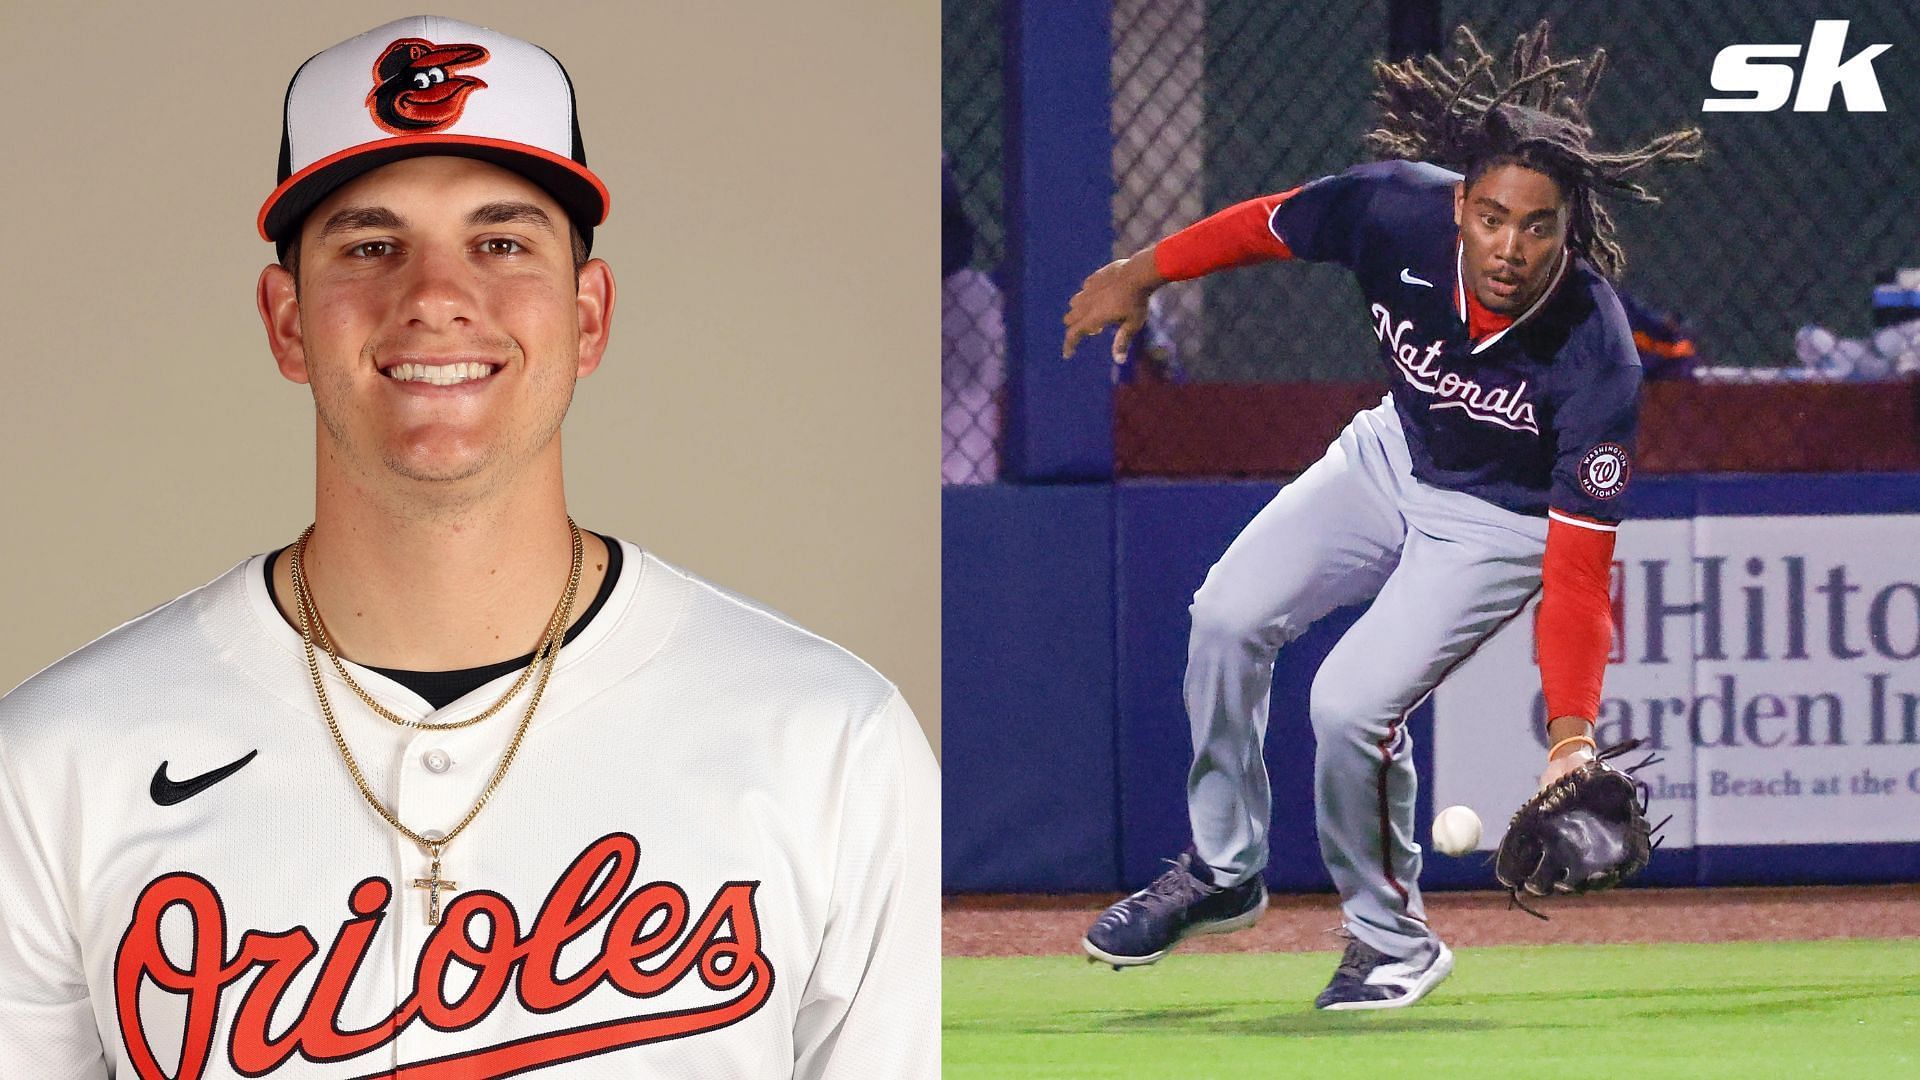 Coby Mayo and James Wood are two MLB prospects on the verge of a major league promotion